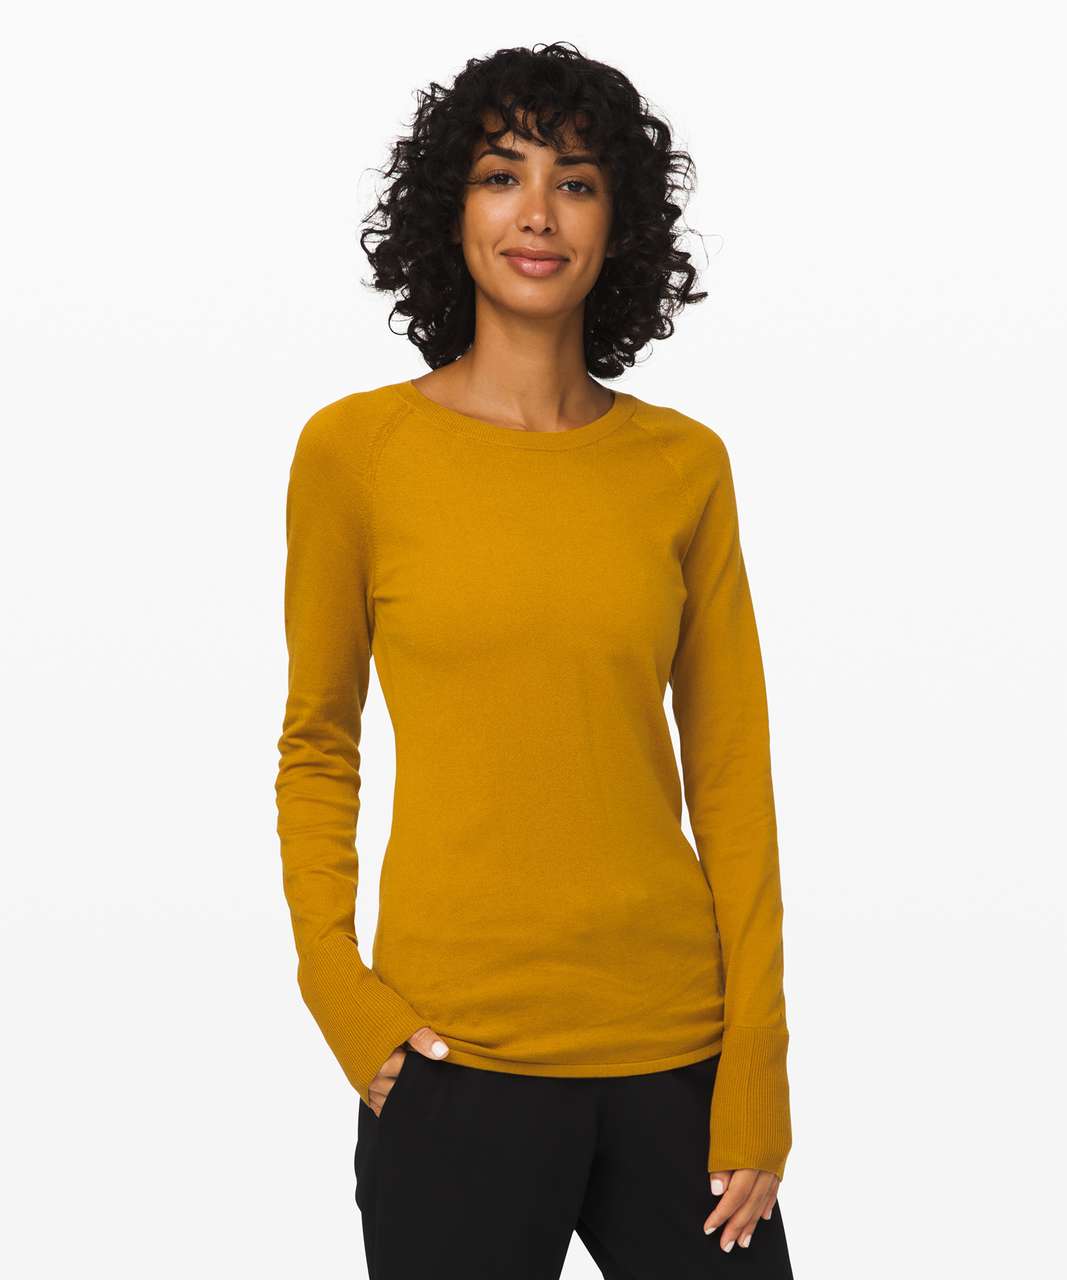 Lululemon Stand Steady Crew Sweater - Fools Gold